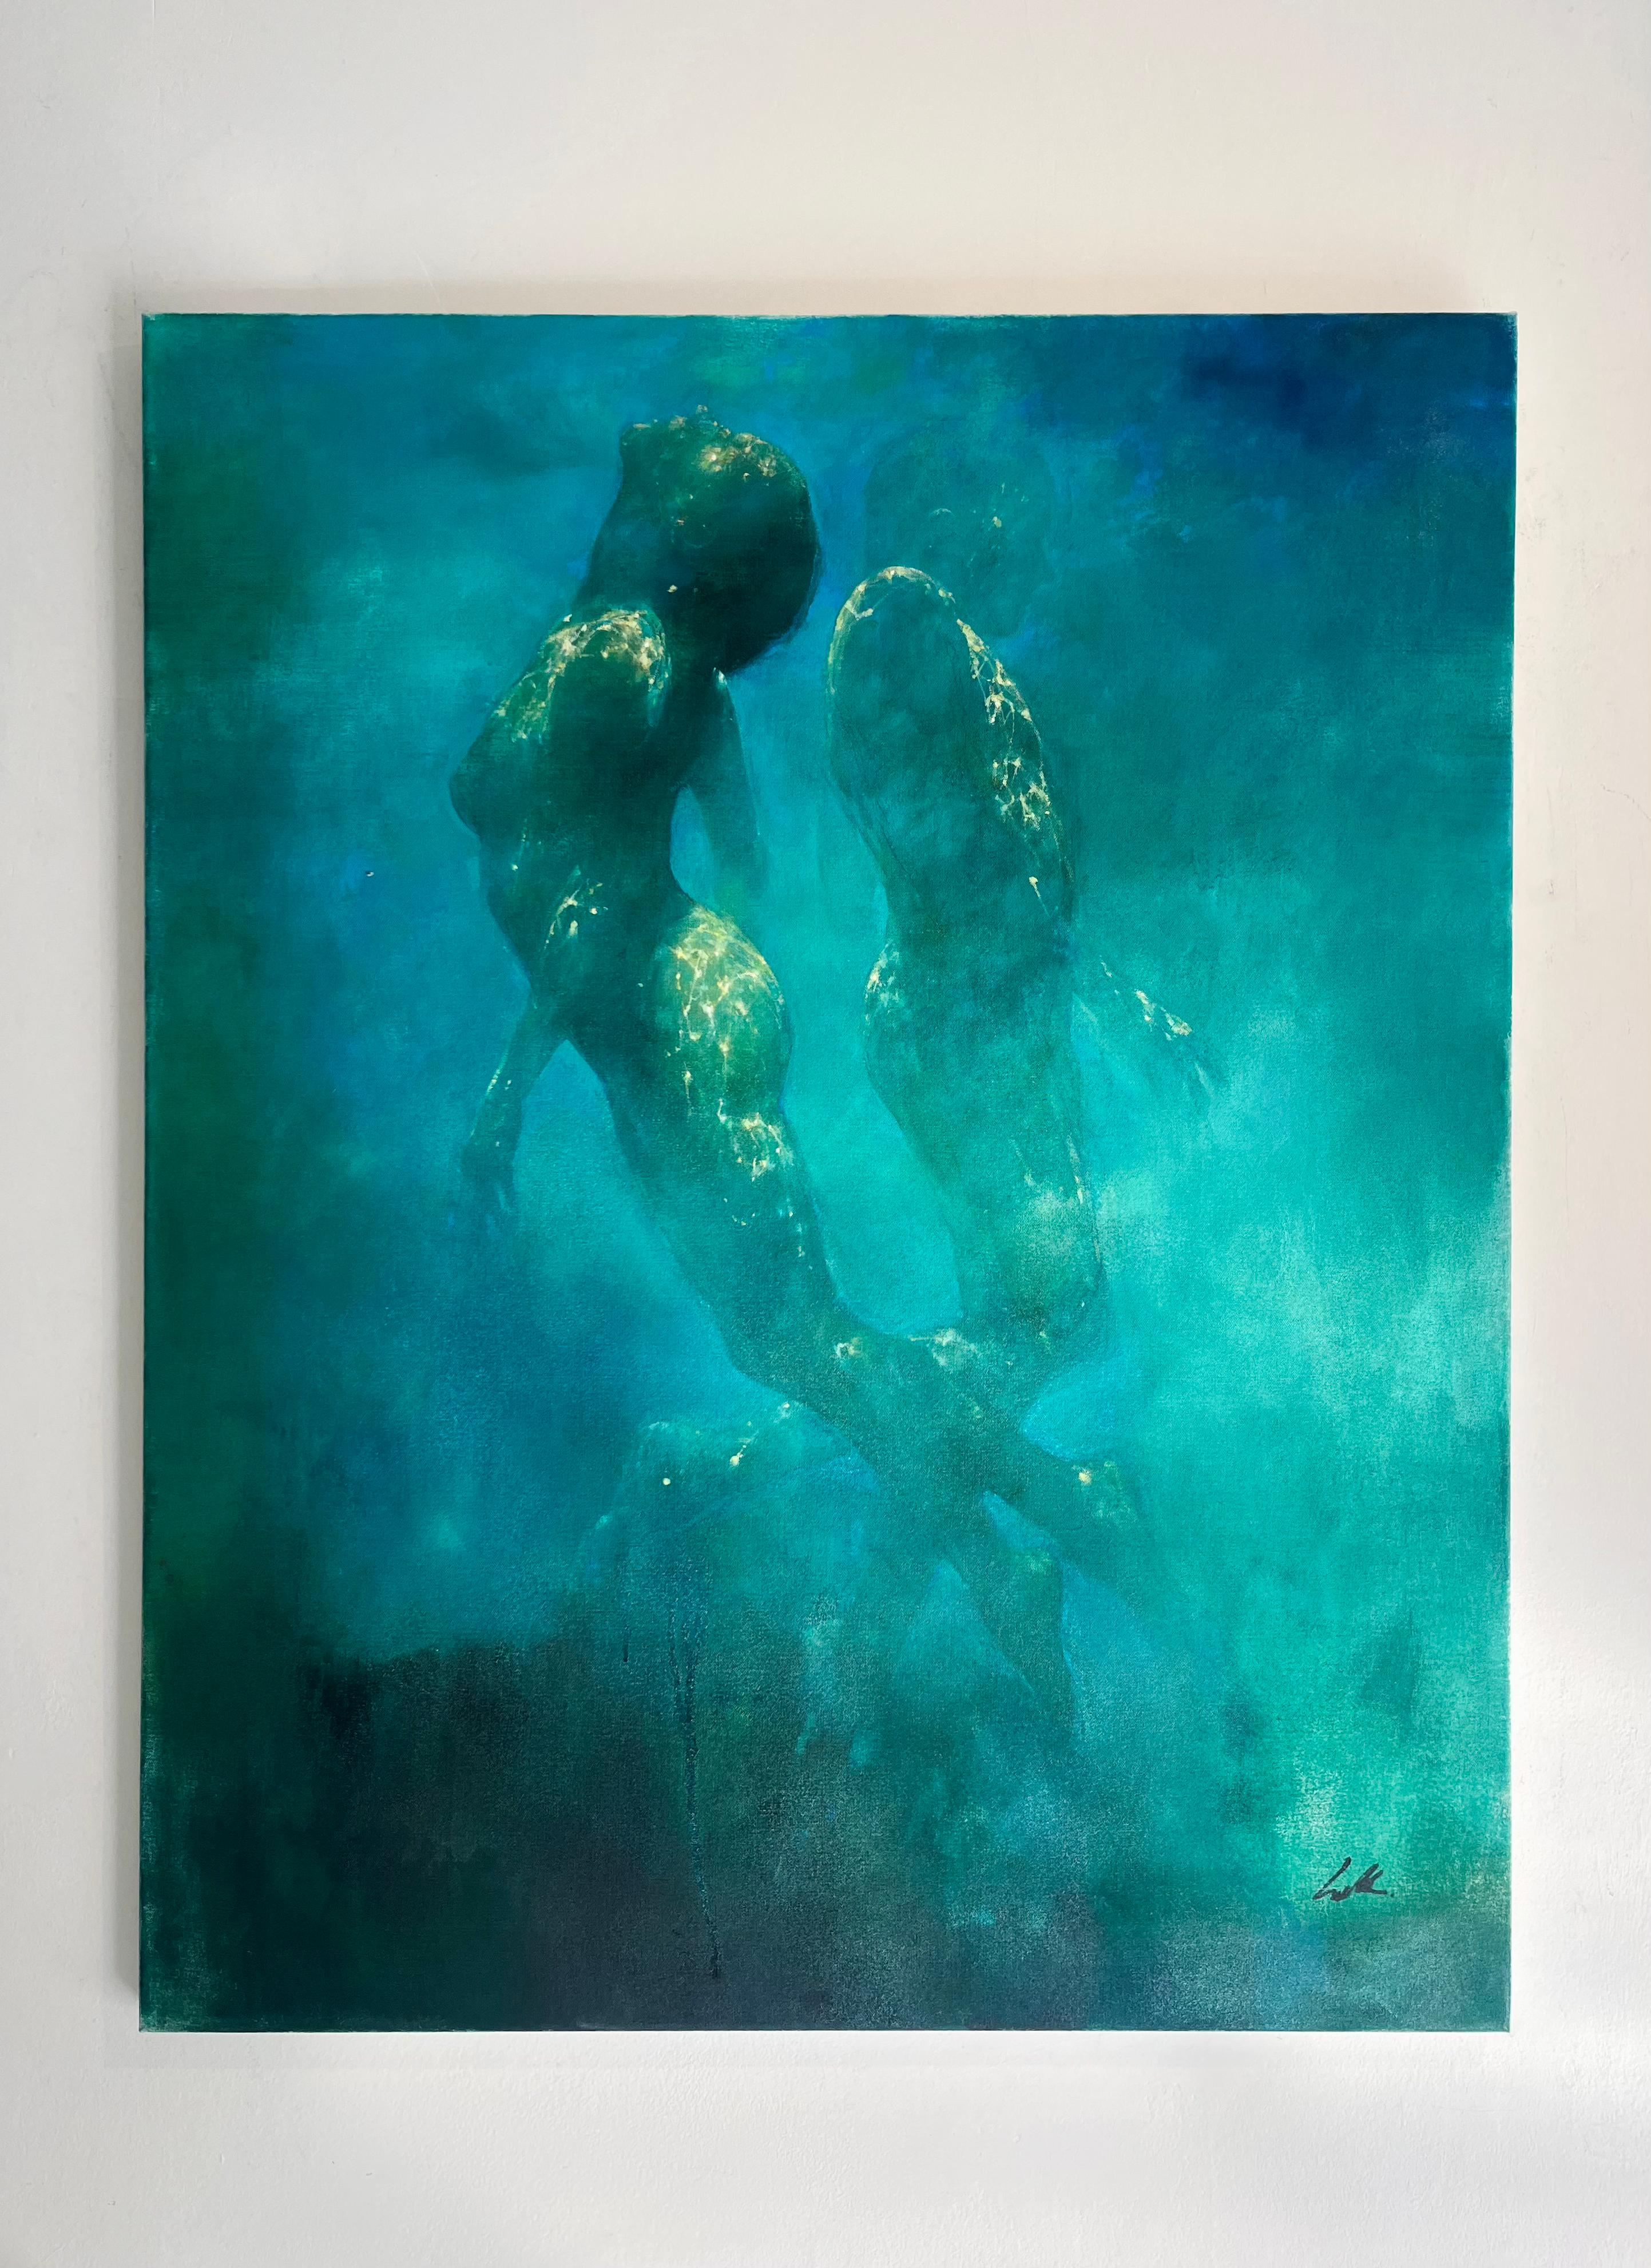  Ocean Whispers - abstract art underwater nude human figurative painting - Painting by Bill Bate